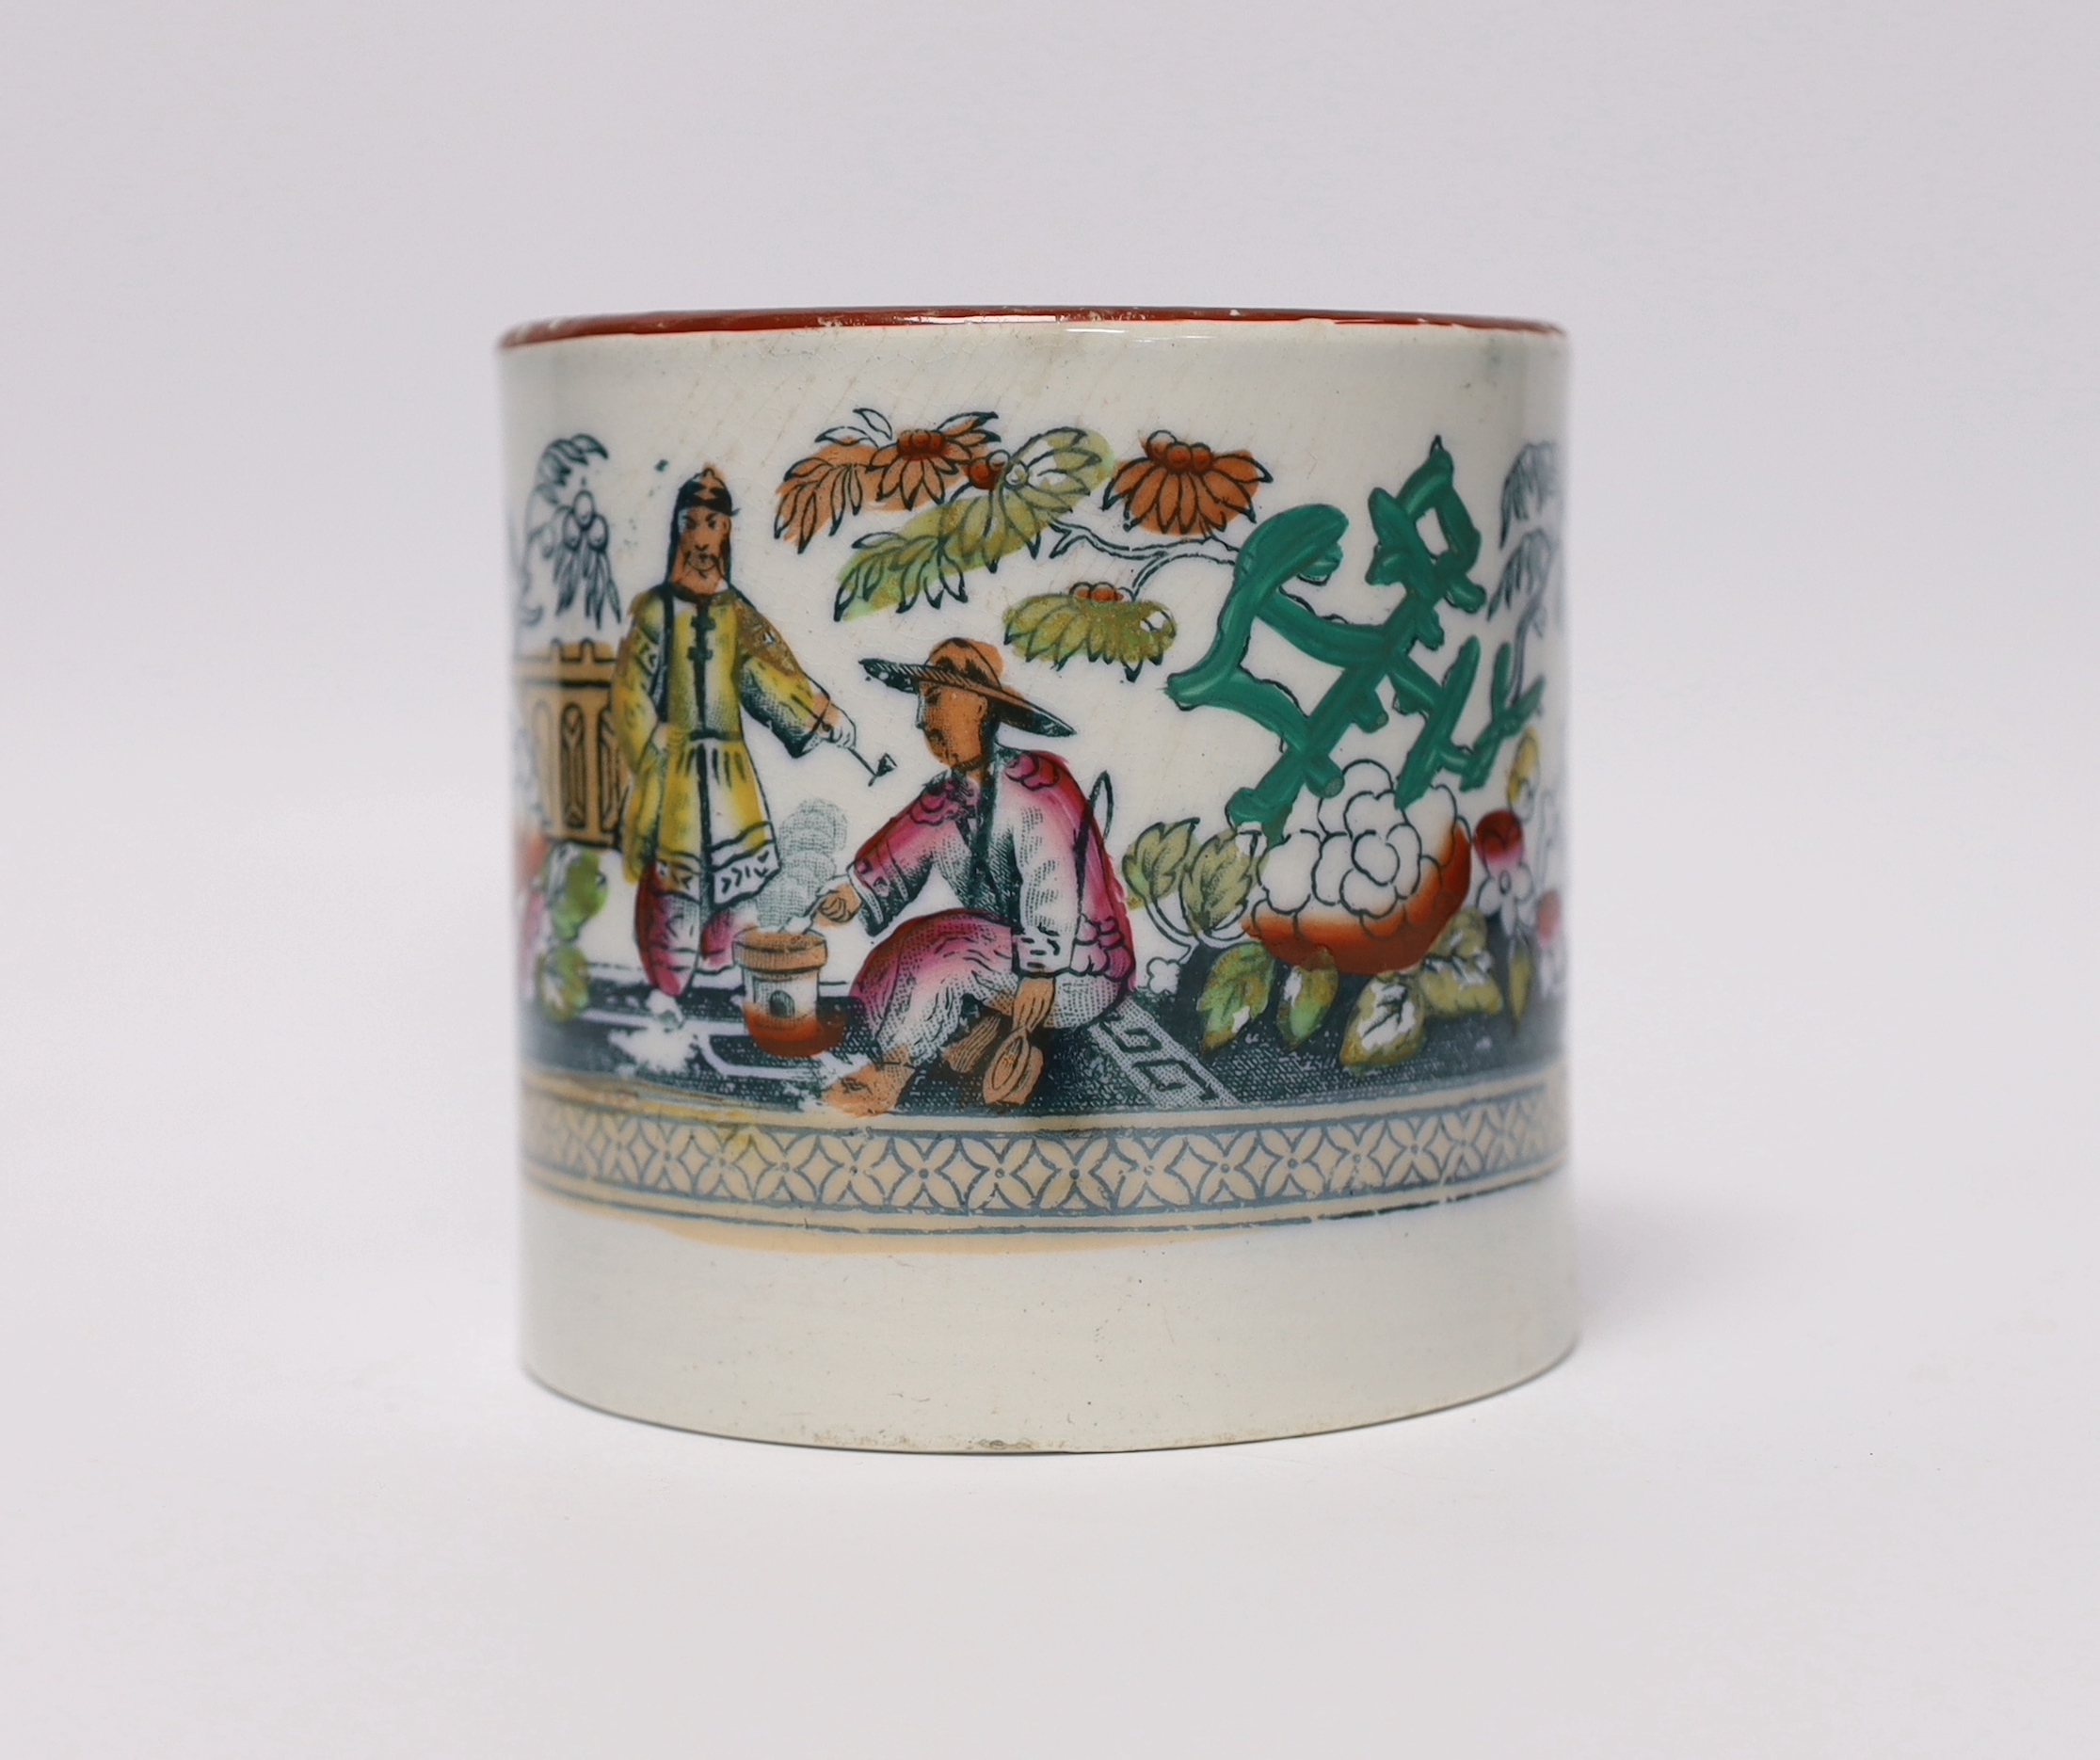 An early 19th century Staffordshire pearlware cylindrical large tankard decorated with Chinese figures and motifs (E and H), 10cm